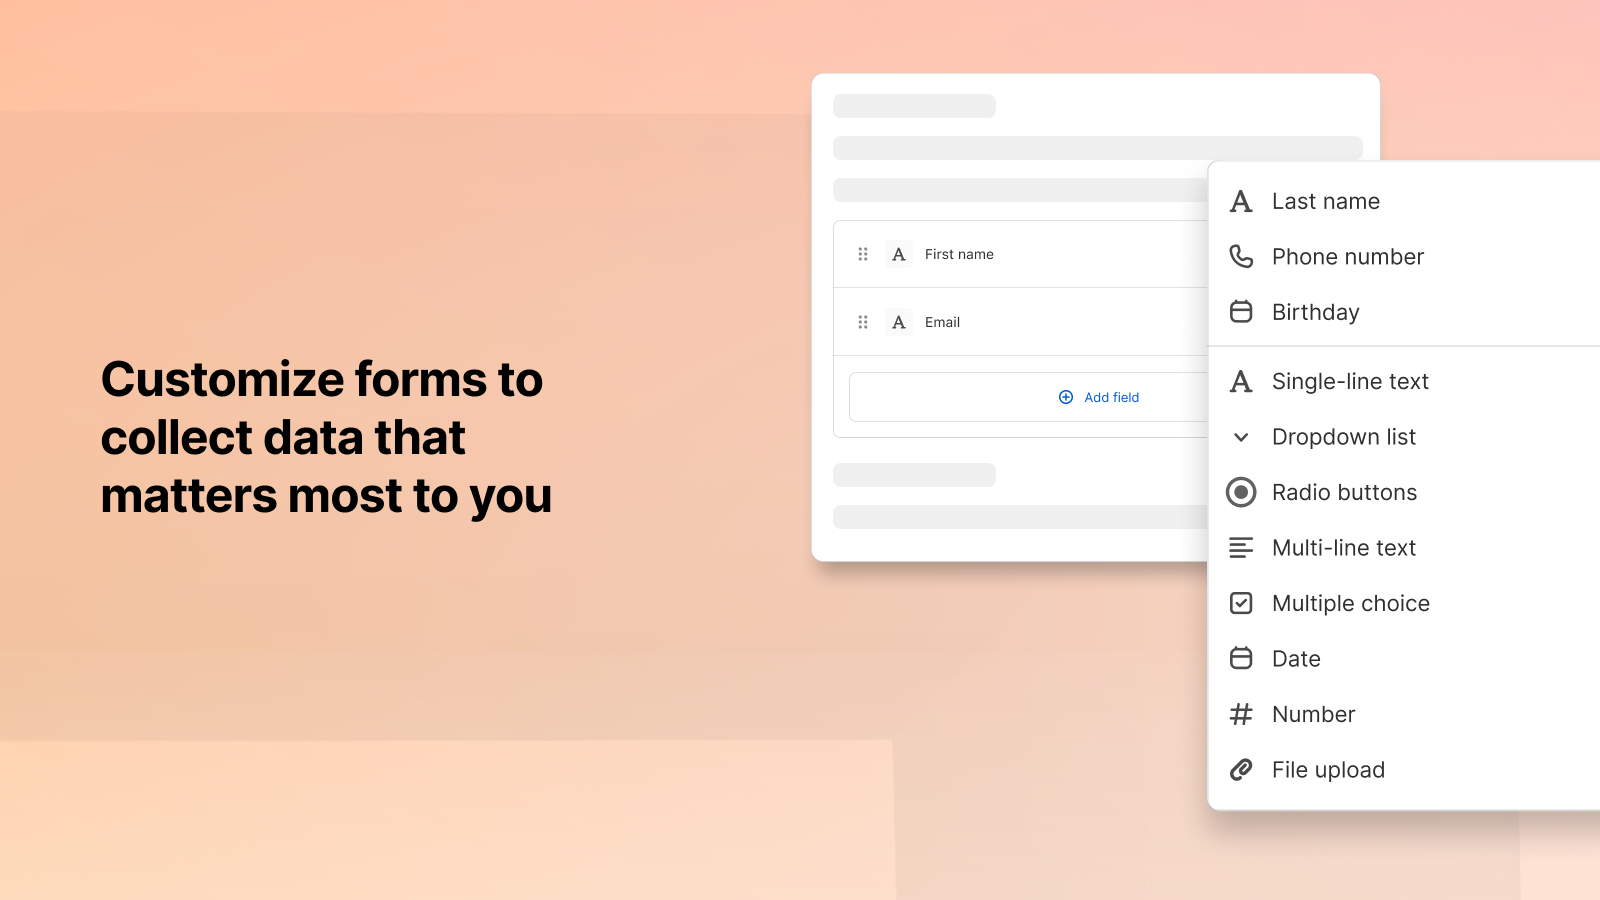 Customize forms to collect data that matters most to you